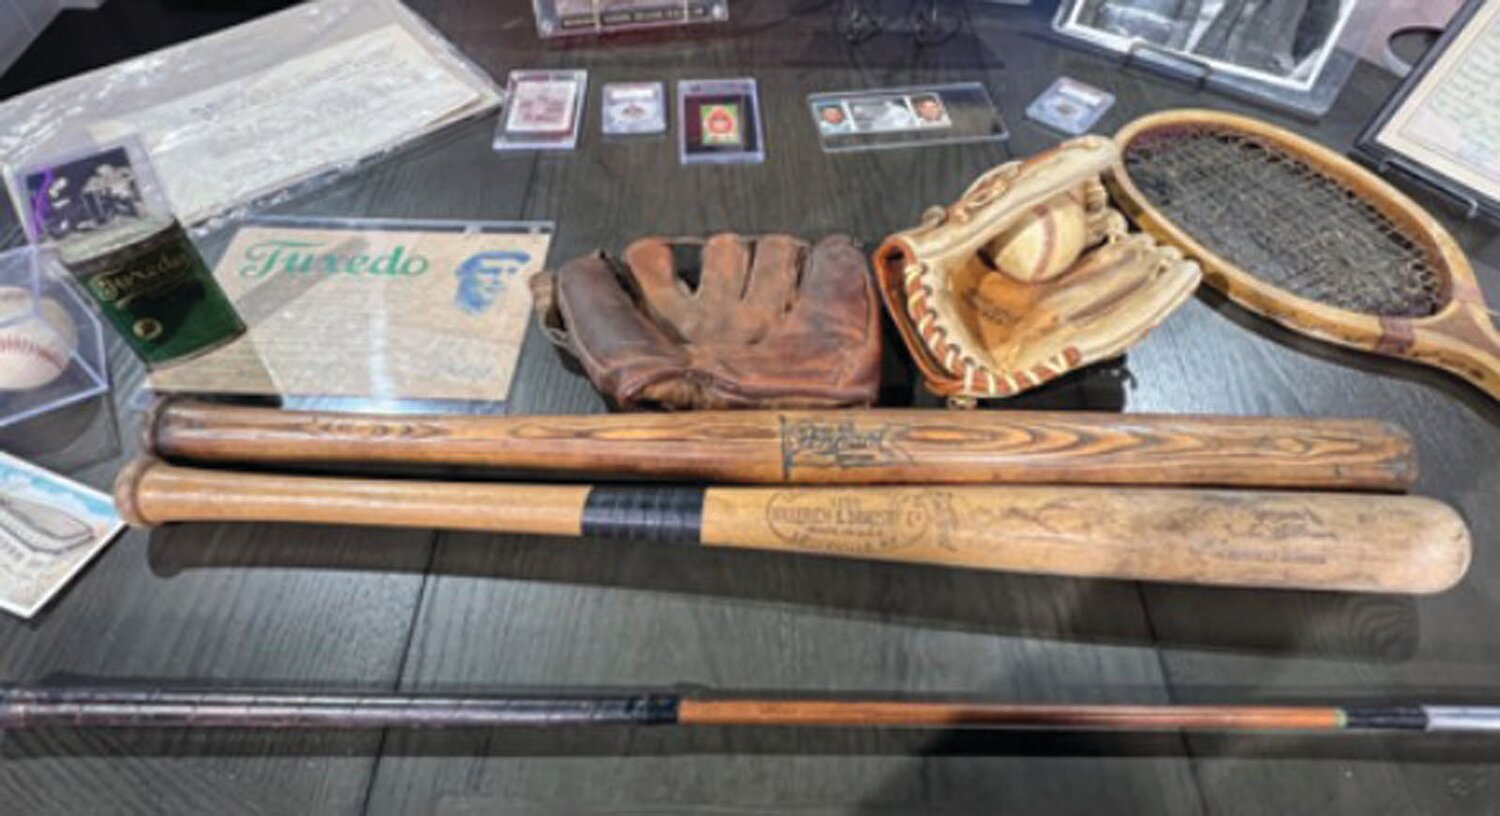 ON THE SHELF: Various collectible items at the Cranston Card Show feature bats, wooden golf clubs, tennis rackets, boxing autographs, gloves, scorecards, advertising, postcards, and tobacco cards.